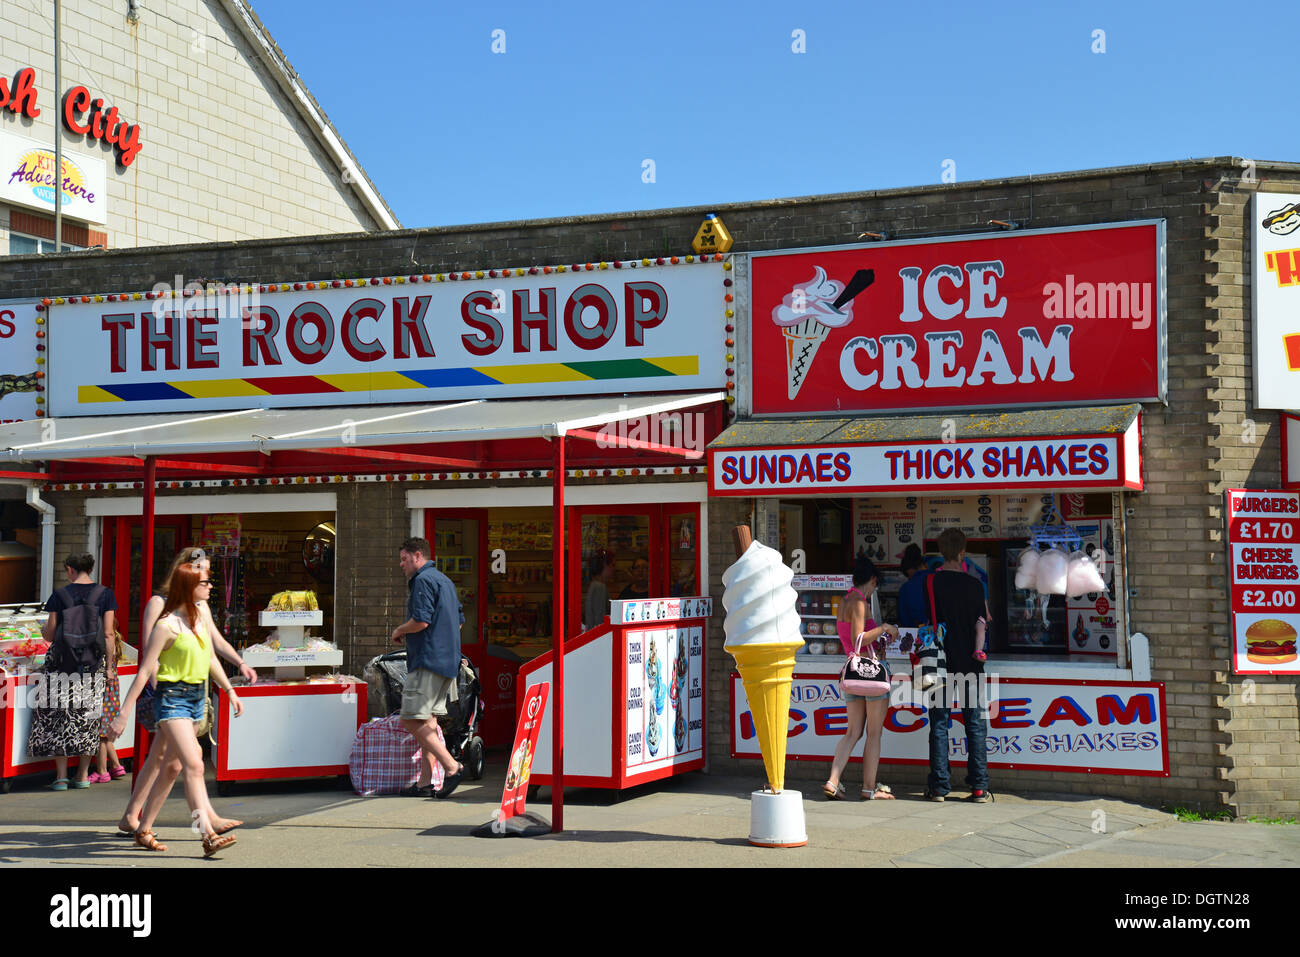 The Rock Shop on seafront promenade, Mablethorpe Beach, Mablethorpe, Lincolnshire, England, United Kingdom Stock Photo